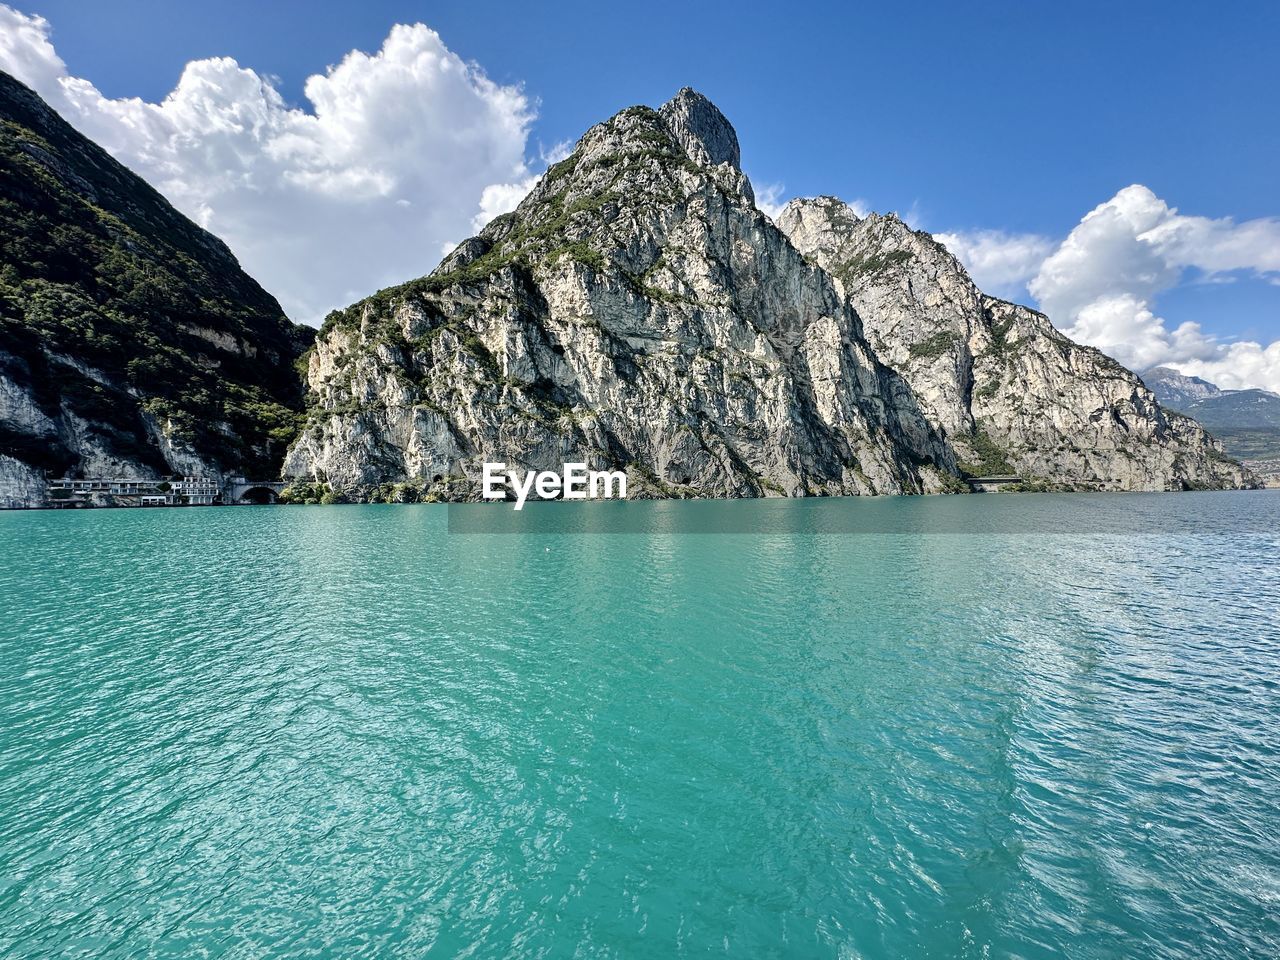 water, mountain, scenics - nature, beauty in nature, sky, land, environment, landscape, nature, mountain range, sea, blue, travel destinations, tranquil scene, turquoise colored, travel, tranquility, rock, idyllic, cloud, no people, mountain peak, day, tourism, pinaceae, non-urban scene, pine tree, bay, outdoors, beach, coniferous tree, tree, vacation, summer, trip, glacial landform, holiday, pine woodland, sunny, snow, cliff, forest, cold temperature, sunlight, waterfront